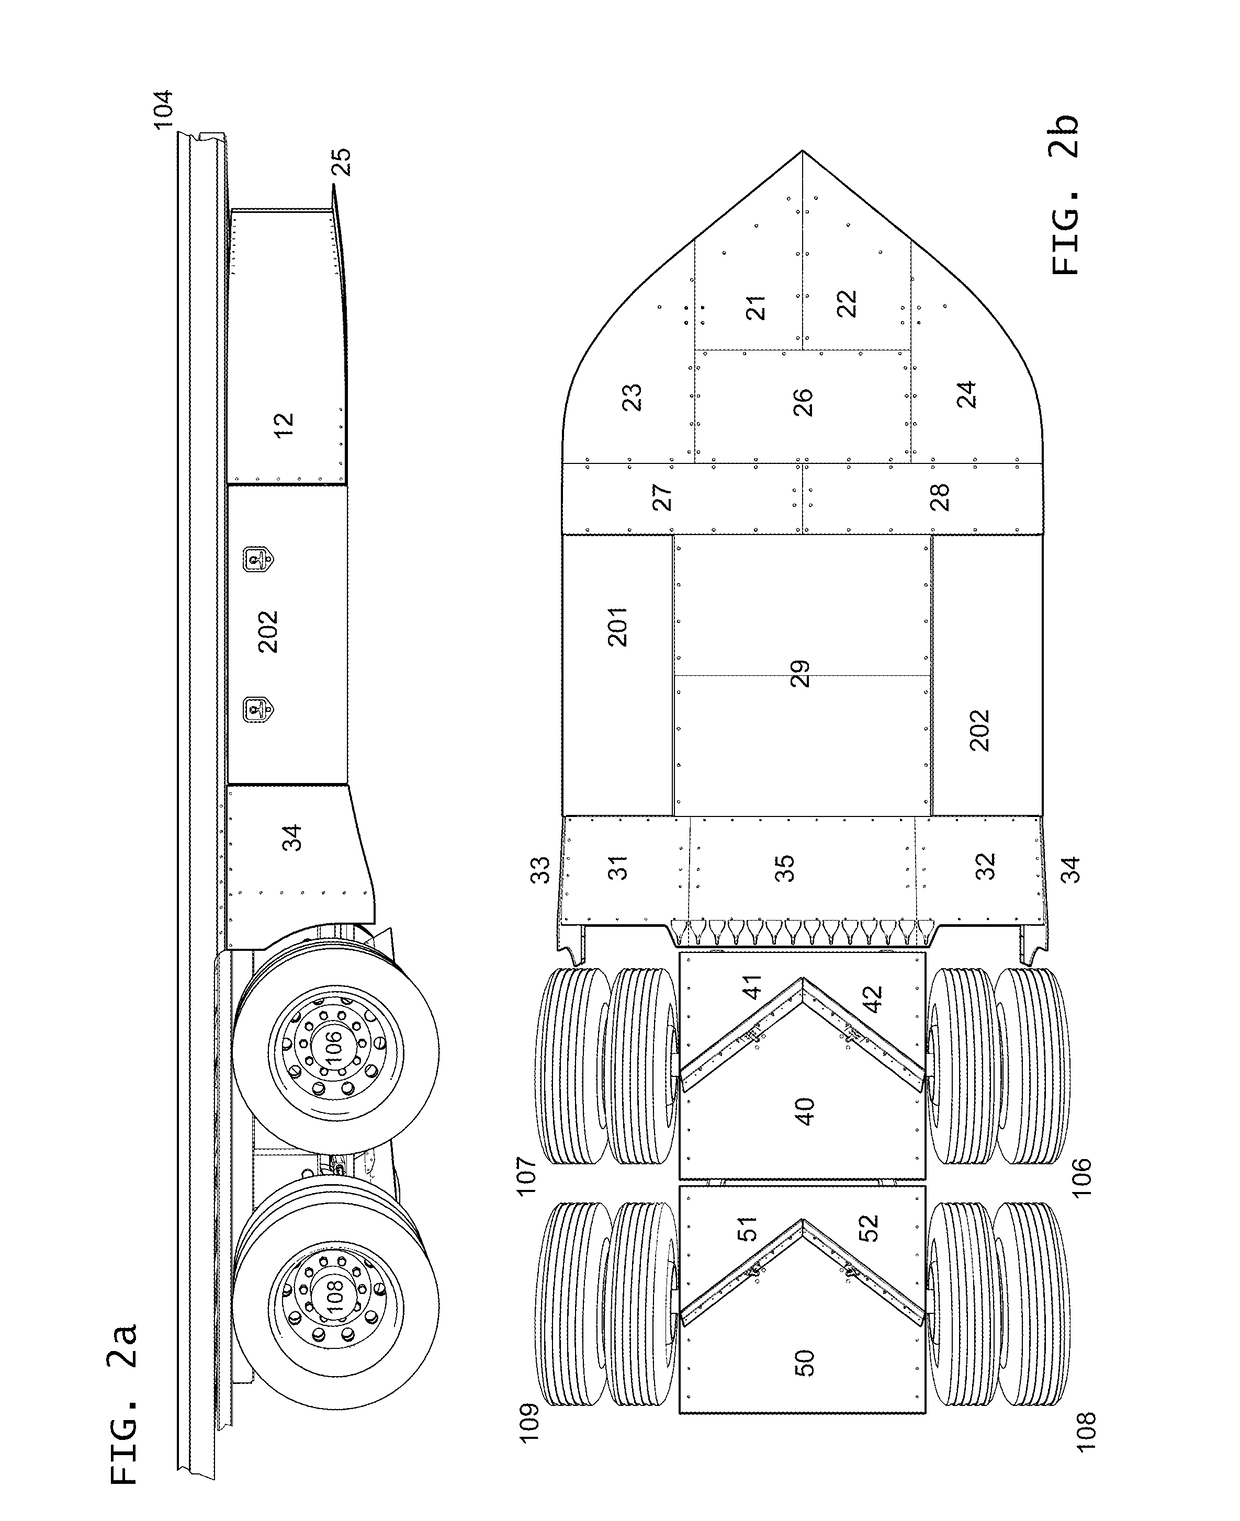 Vehicle Fairing with Brake Cooling System